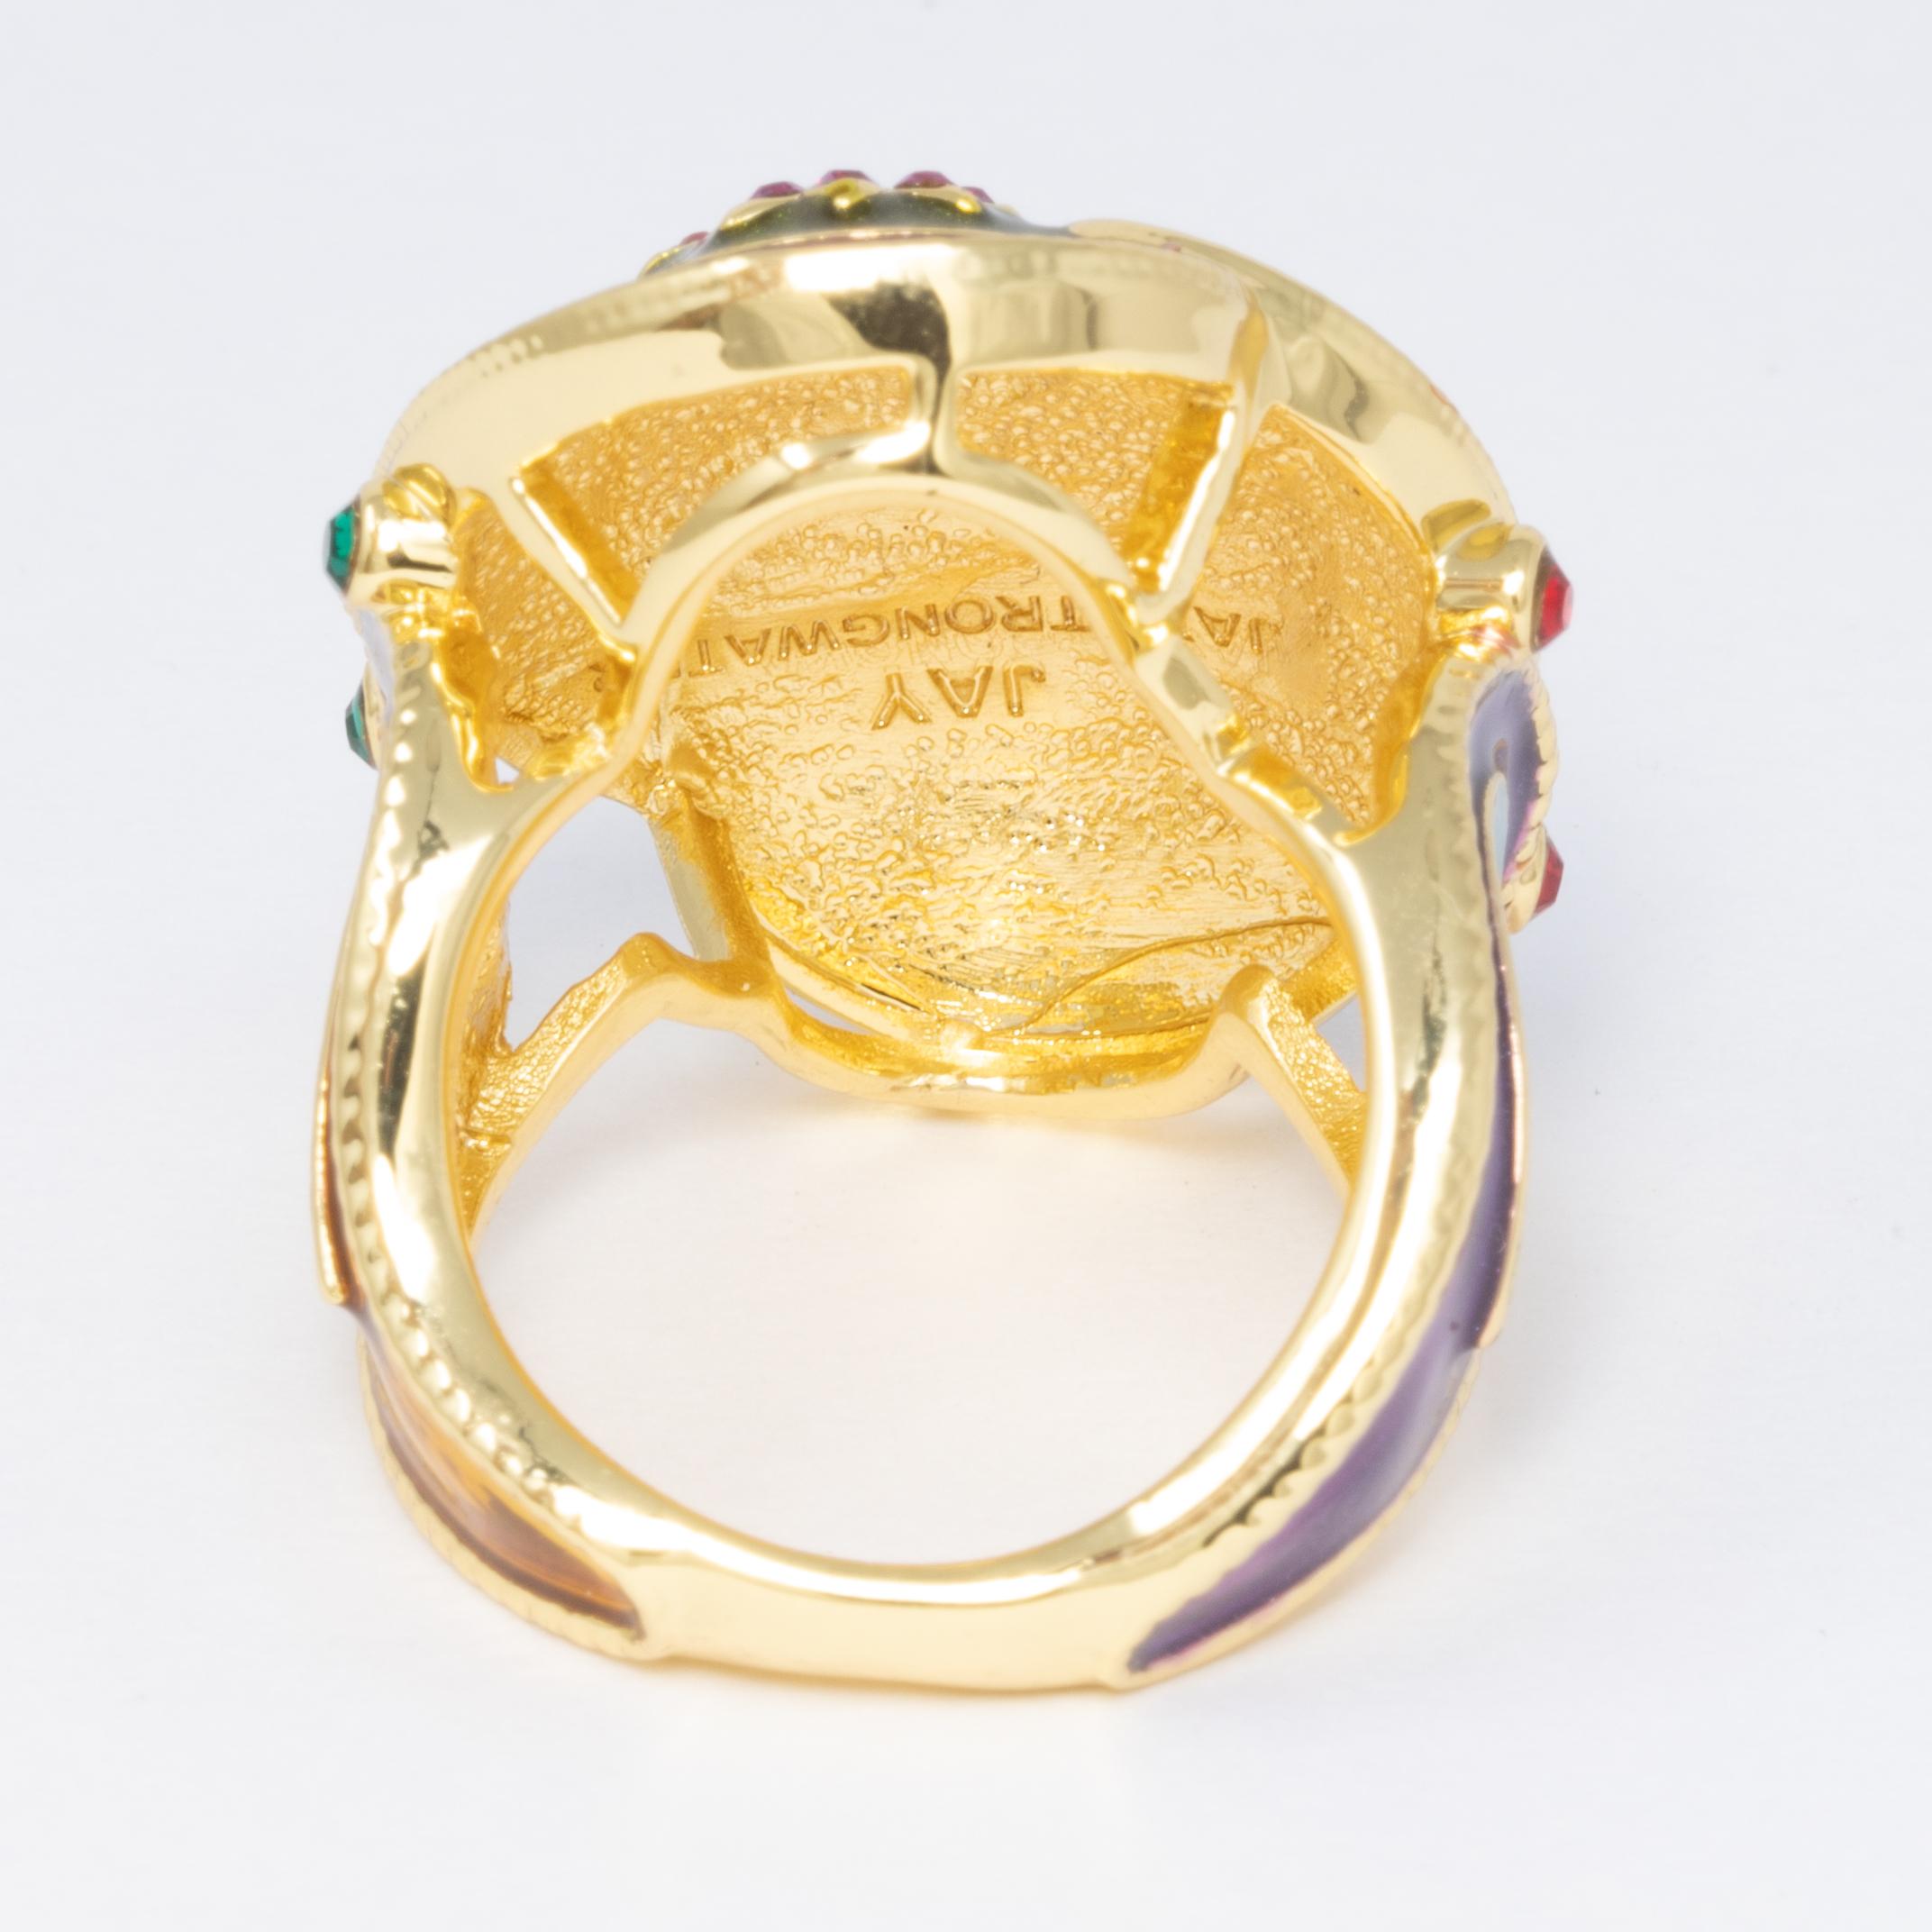 Contemporary Jay Strongwater Gold Double Paisley Raised Cocktail Ring, Enamel, Crystals